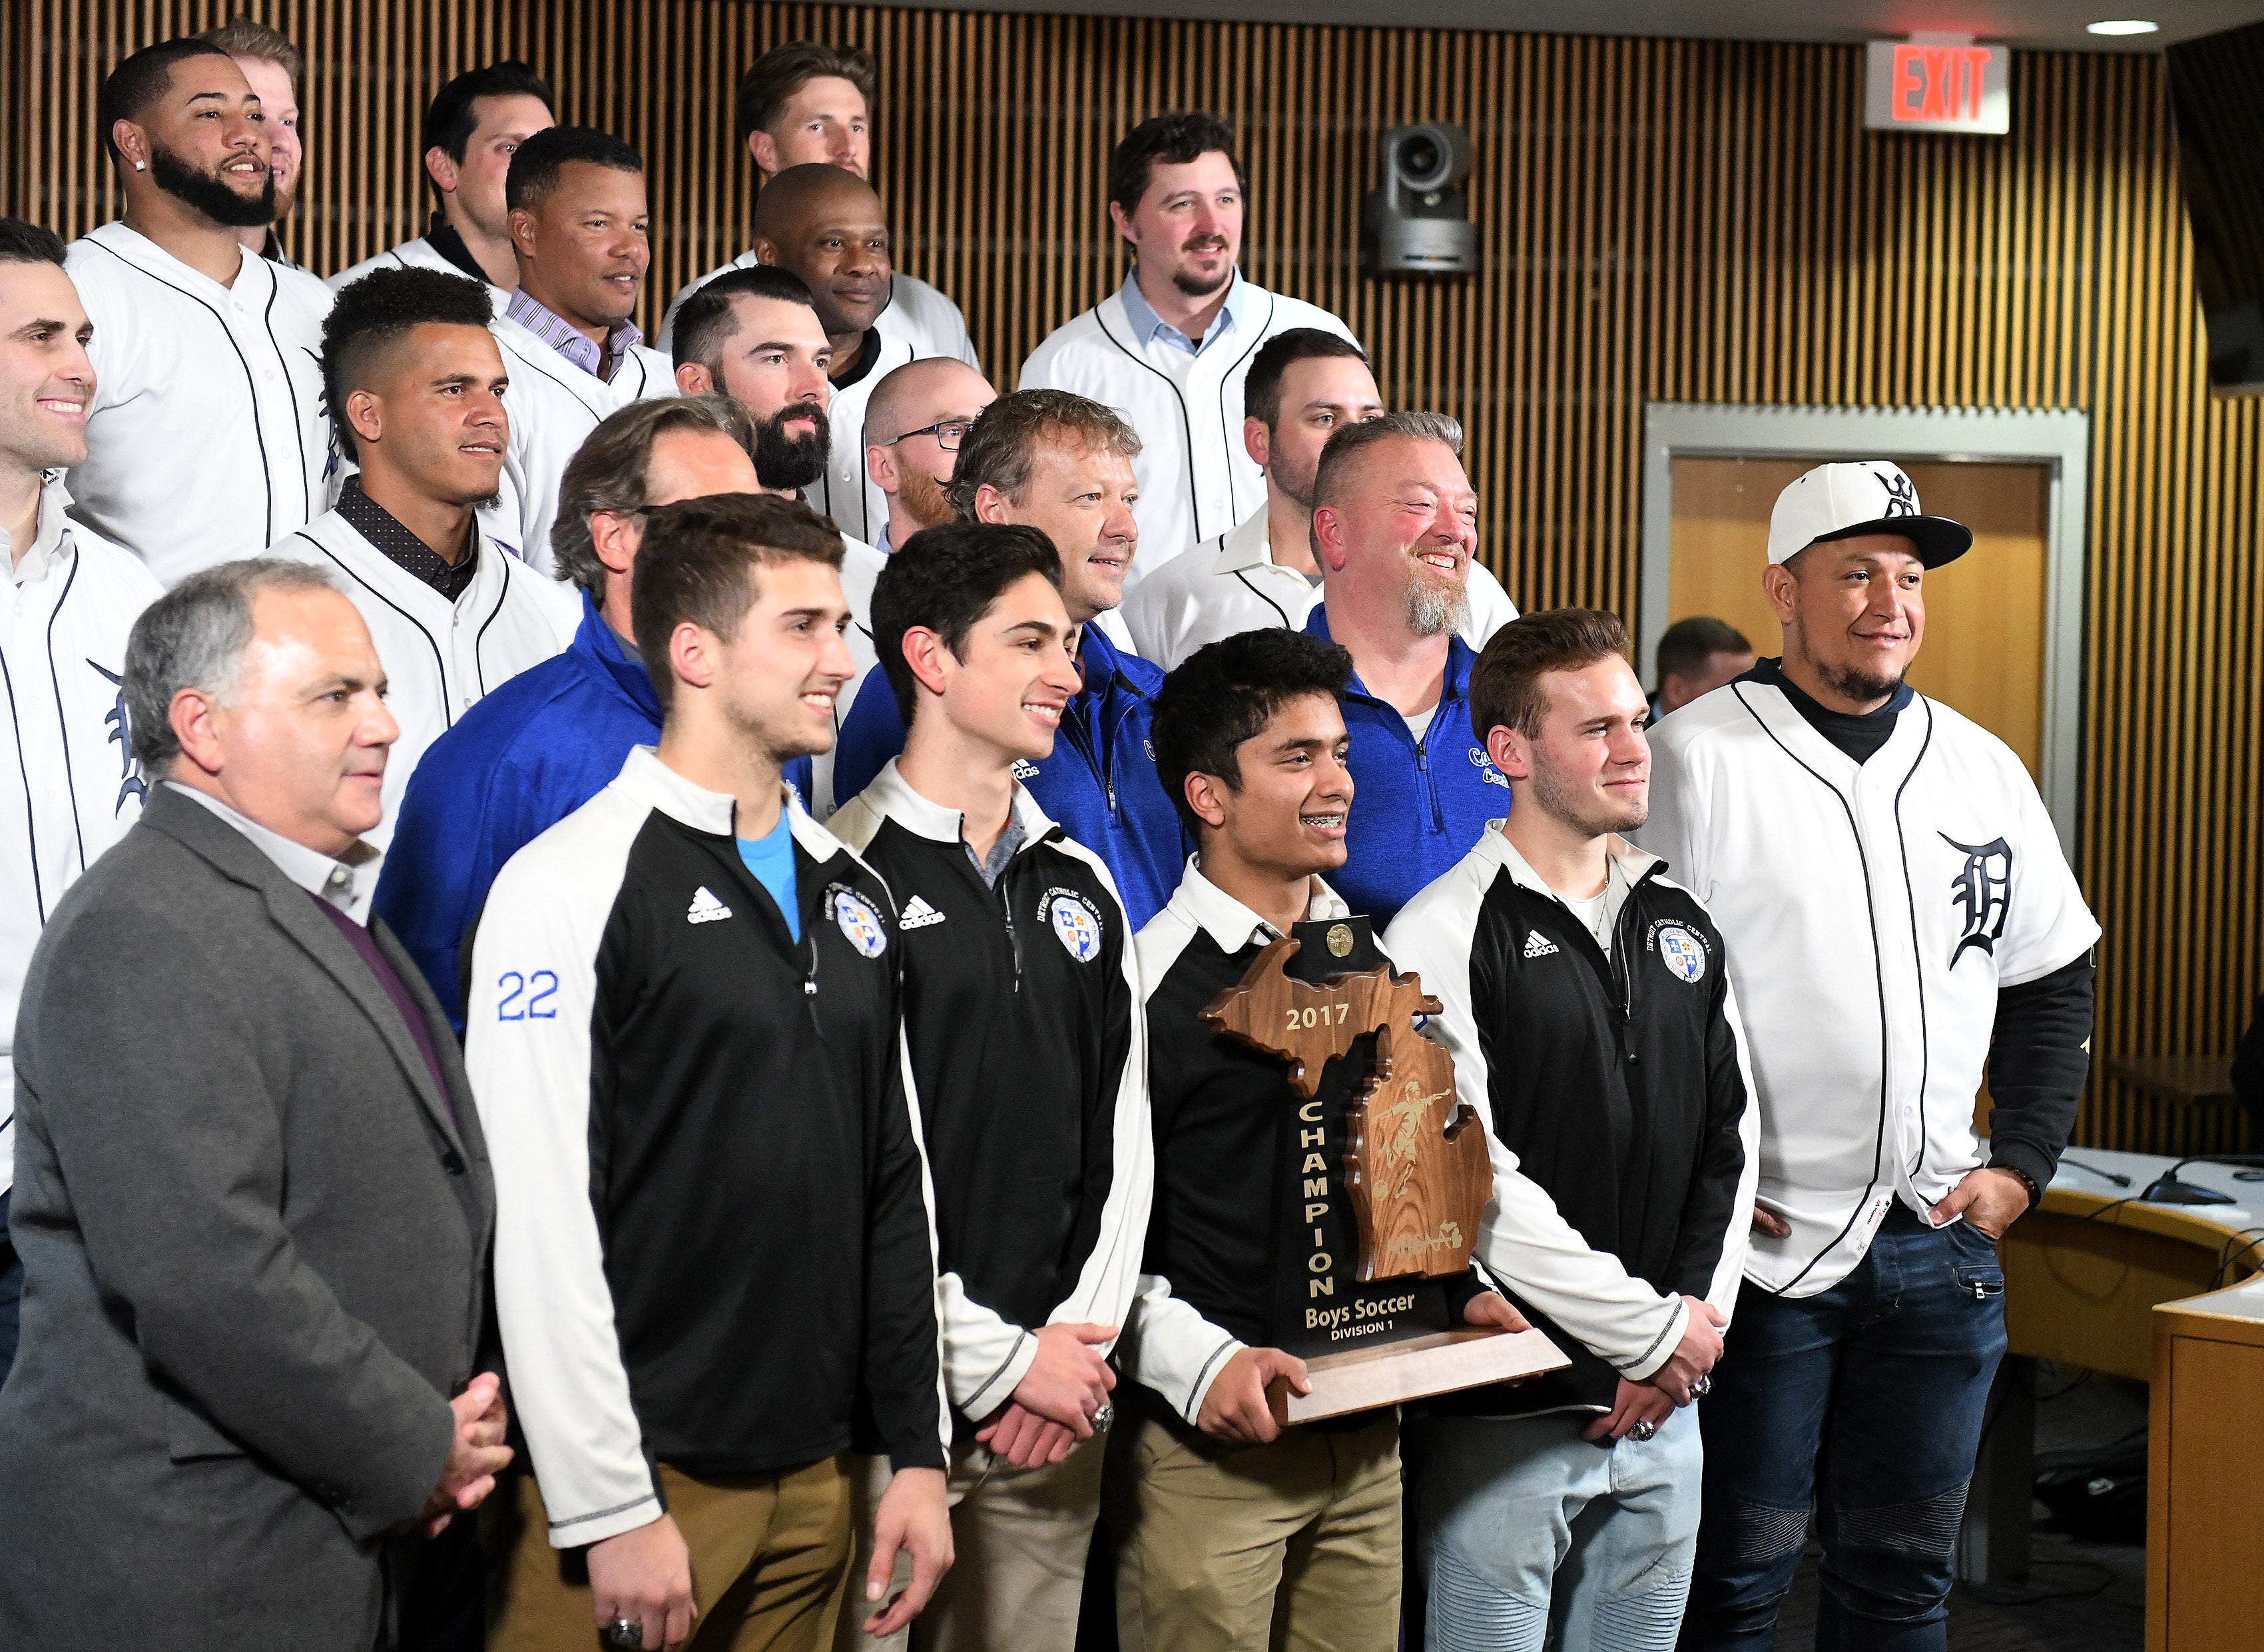 Tigers ' Miguel Cabrera, right, and members of the Detroit Tigers take a group photos with some of the Div. 1 champion Novi soccer players during a stop on the 2019 Detroit Tigers Winter Caravan at the Novi Civic Center in Novi, Mich. on Jan. 24, 2019.